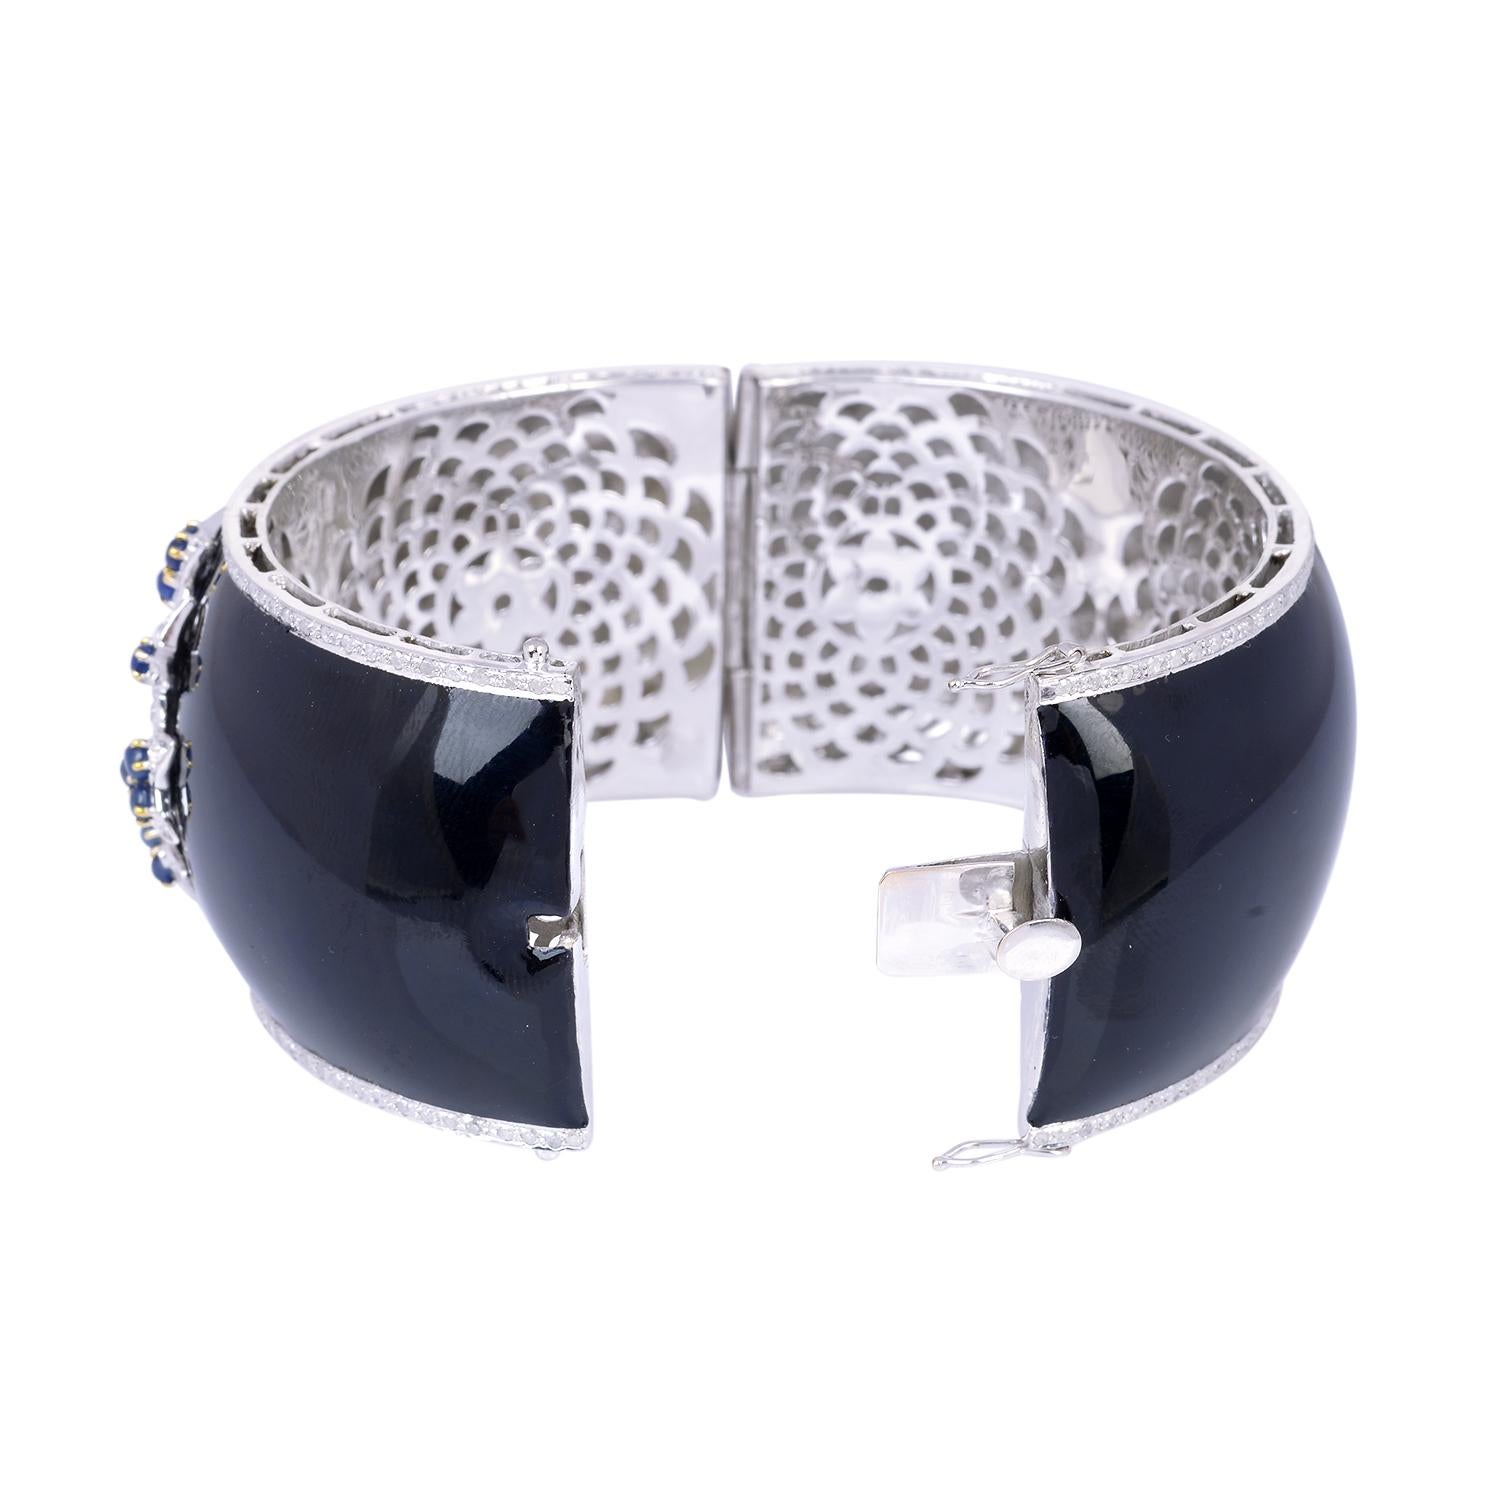 A beautiful enamel bracelet cuff handmade in 14K gold and sterling silver.  It is set in 3.0 carats sapphire and 2.72 carats of sparkling diamonds. Clasp Closure.

FOLLOW  MEGHNA JEWELS storefront to view the latest collection & exclusive pieces. 